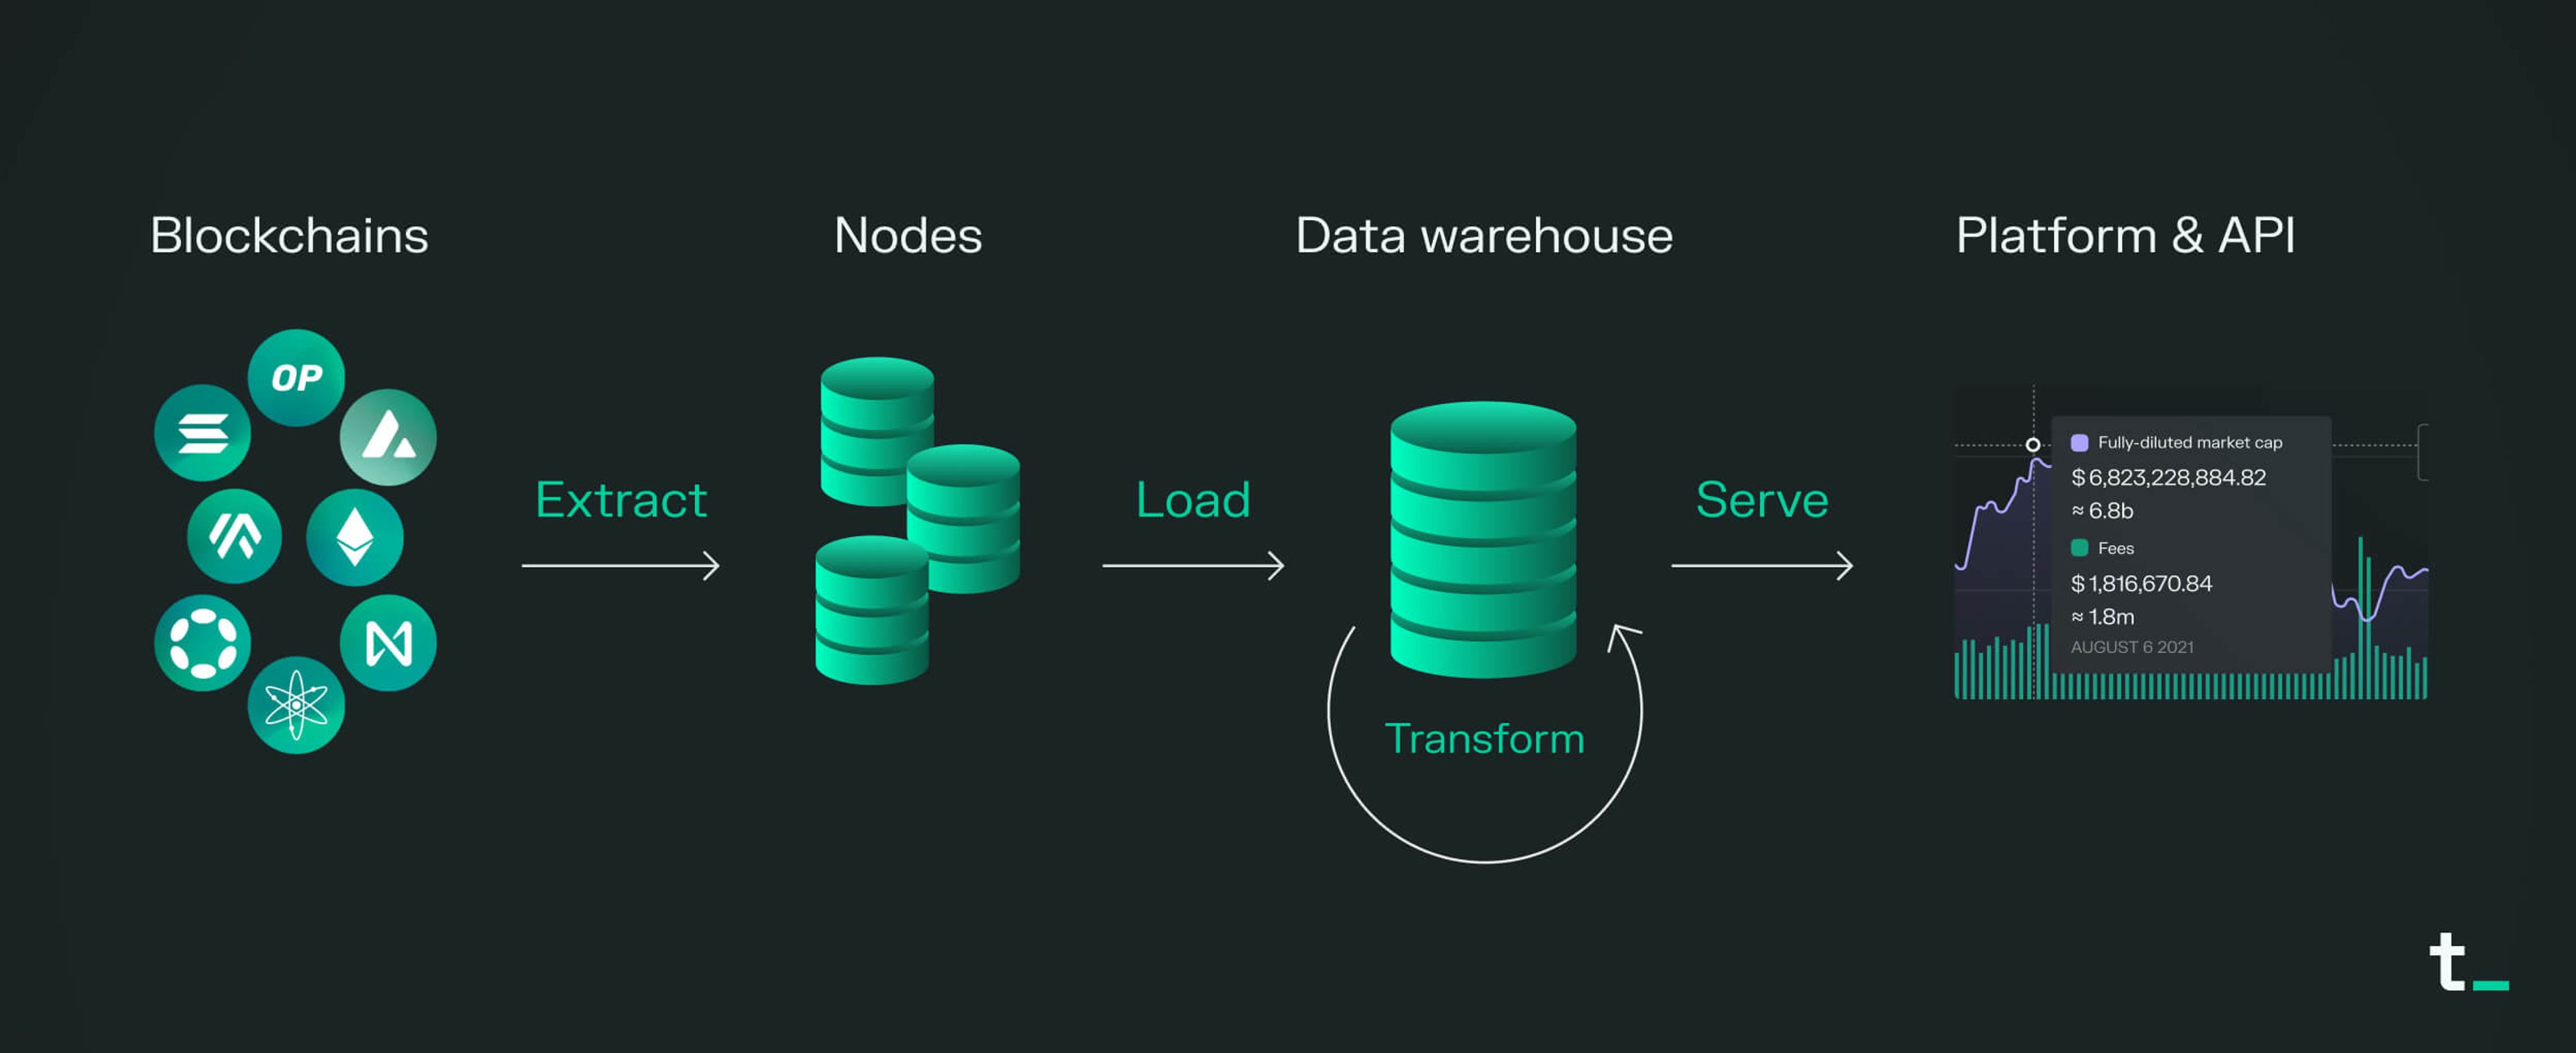 Picture of pipeline: Blockchains extracted by nodes, loaded to data warehouse for transformation and served via platform and API